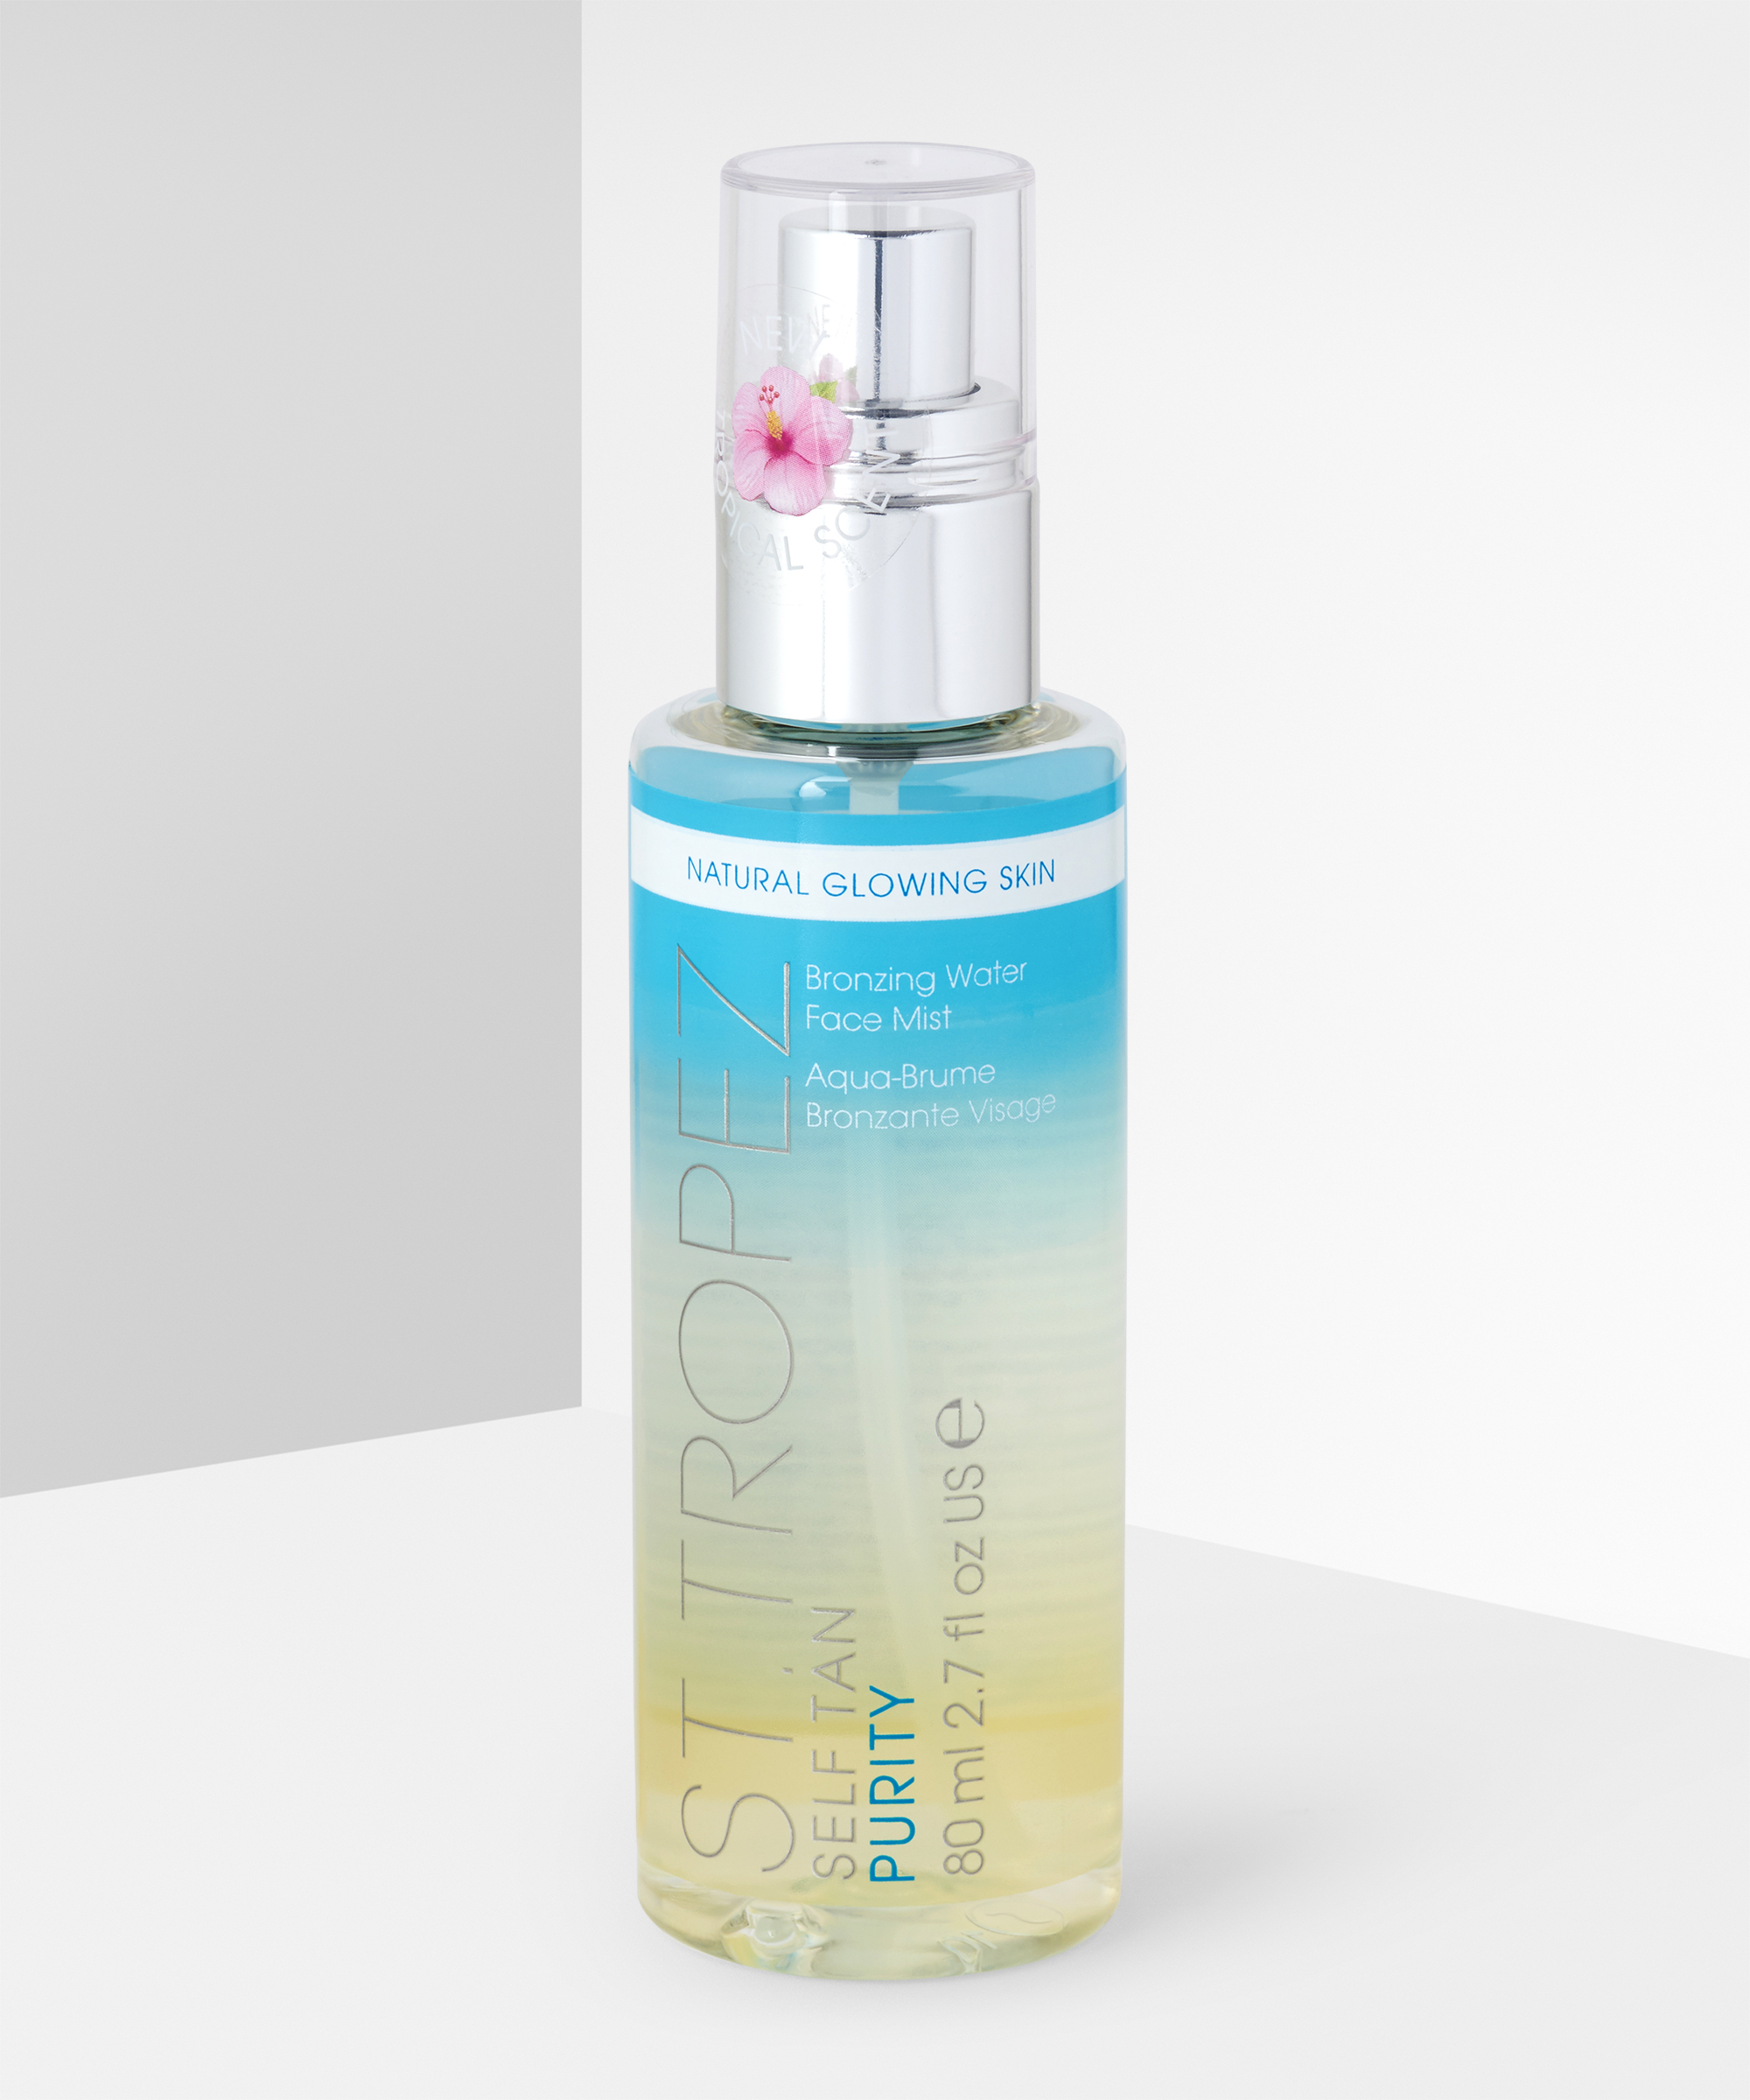 St.Tropez Self Tan Purity Face Mist at BEAUTY BAY